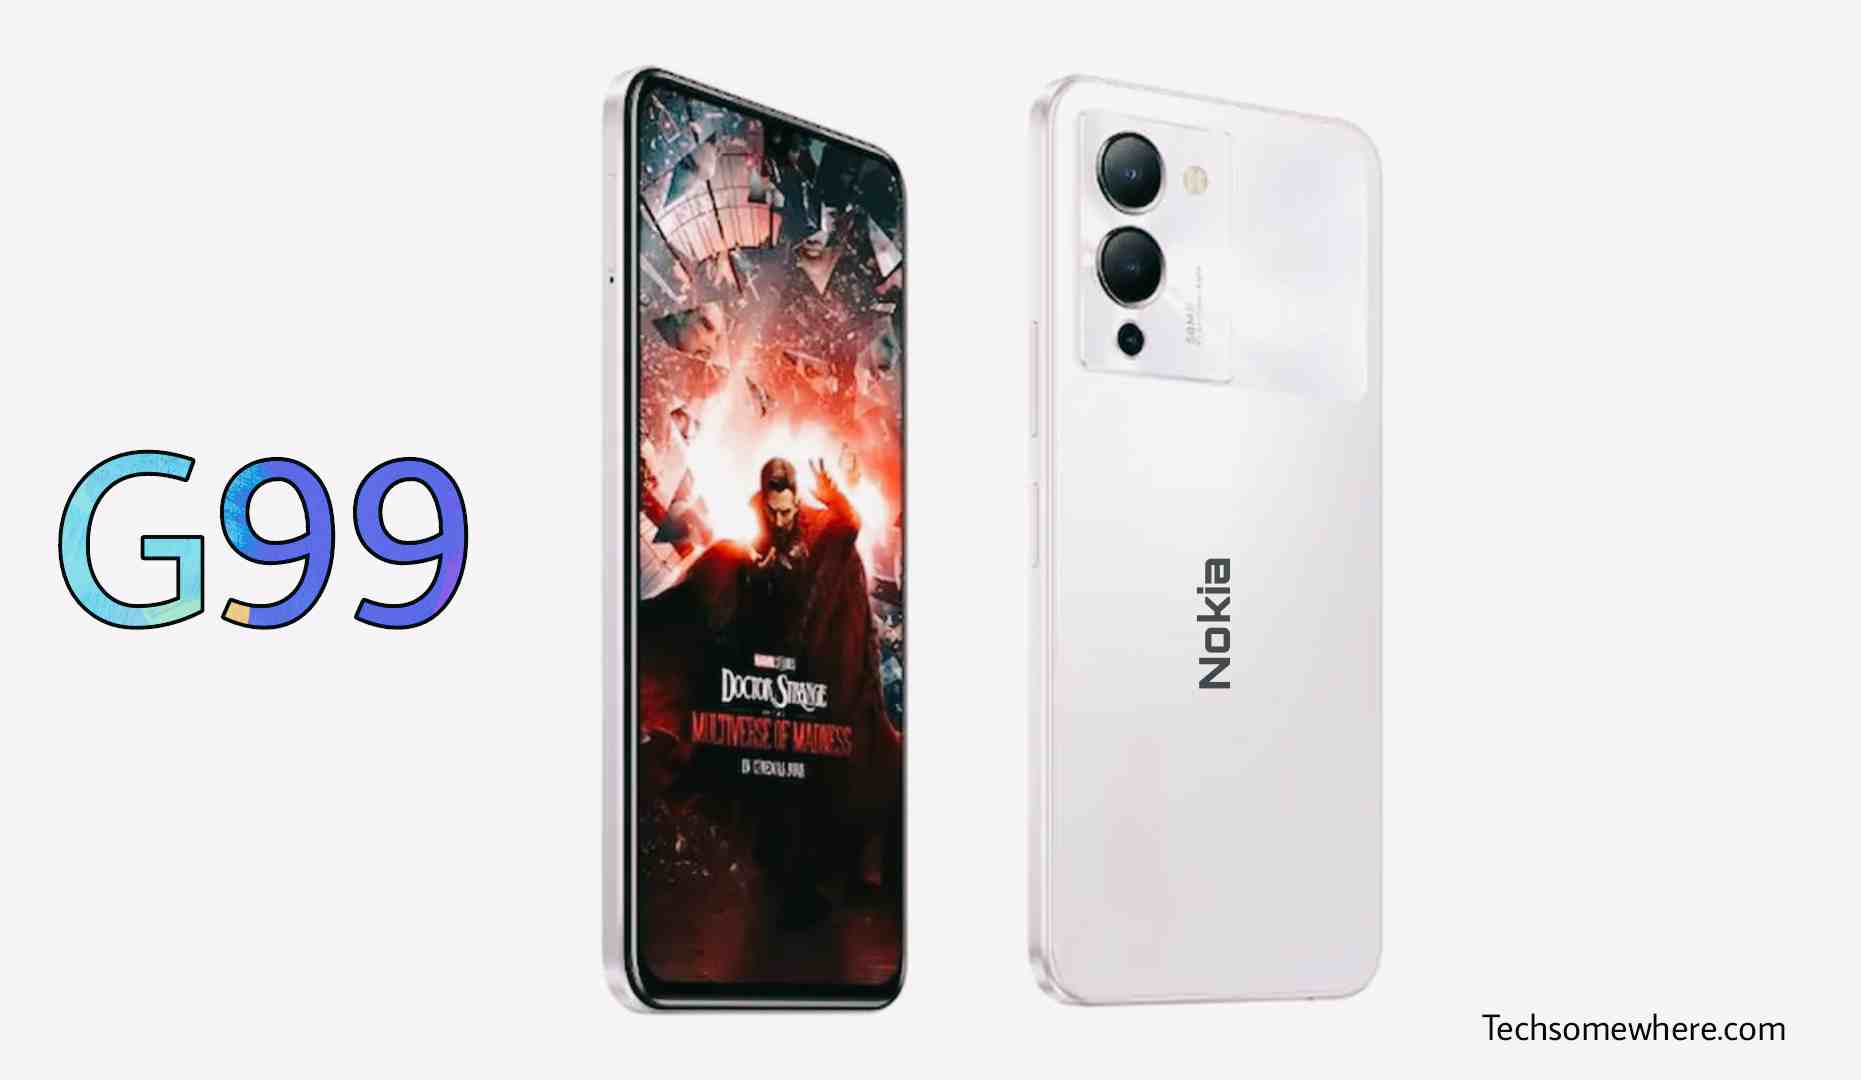 Nokia G99 5G - Price, Full Specifications & Release Date.